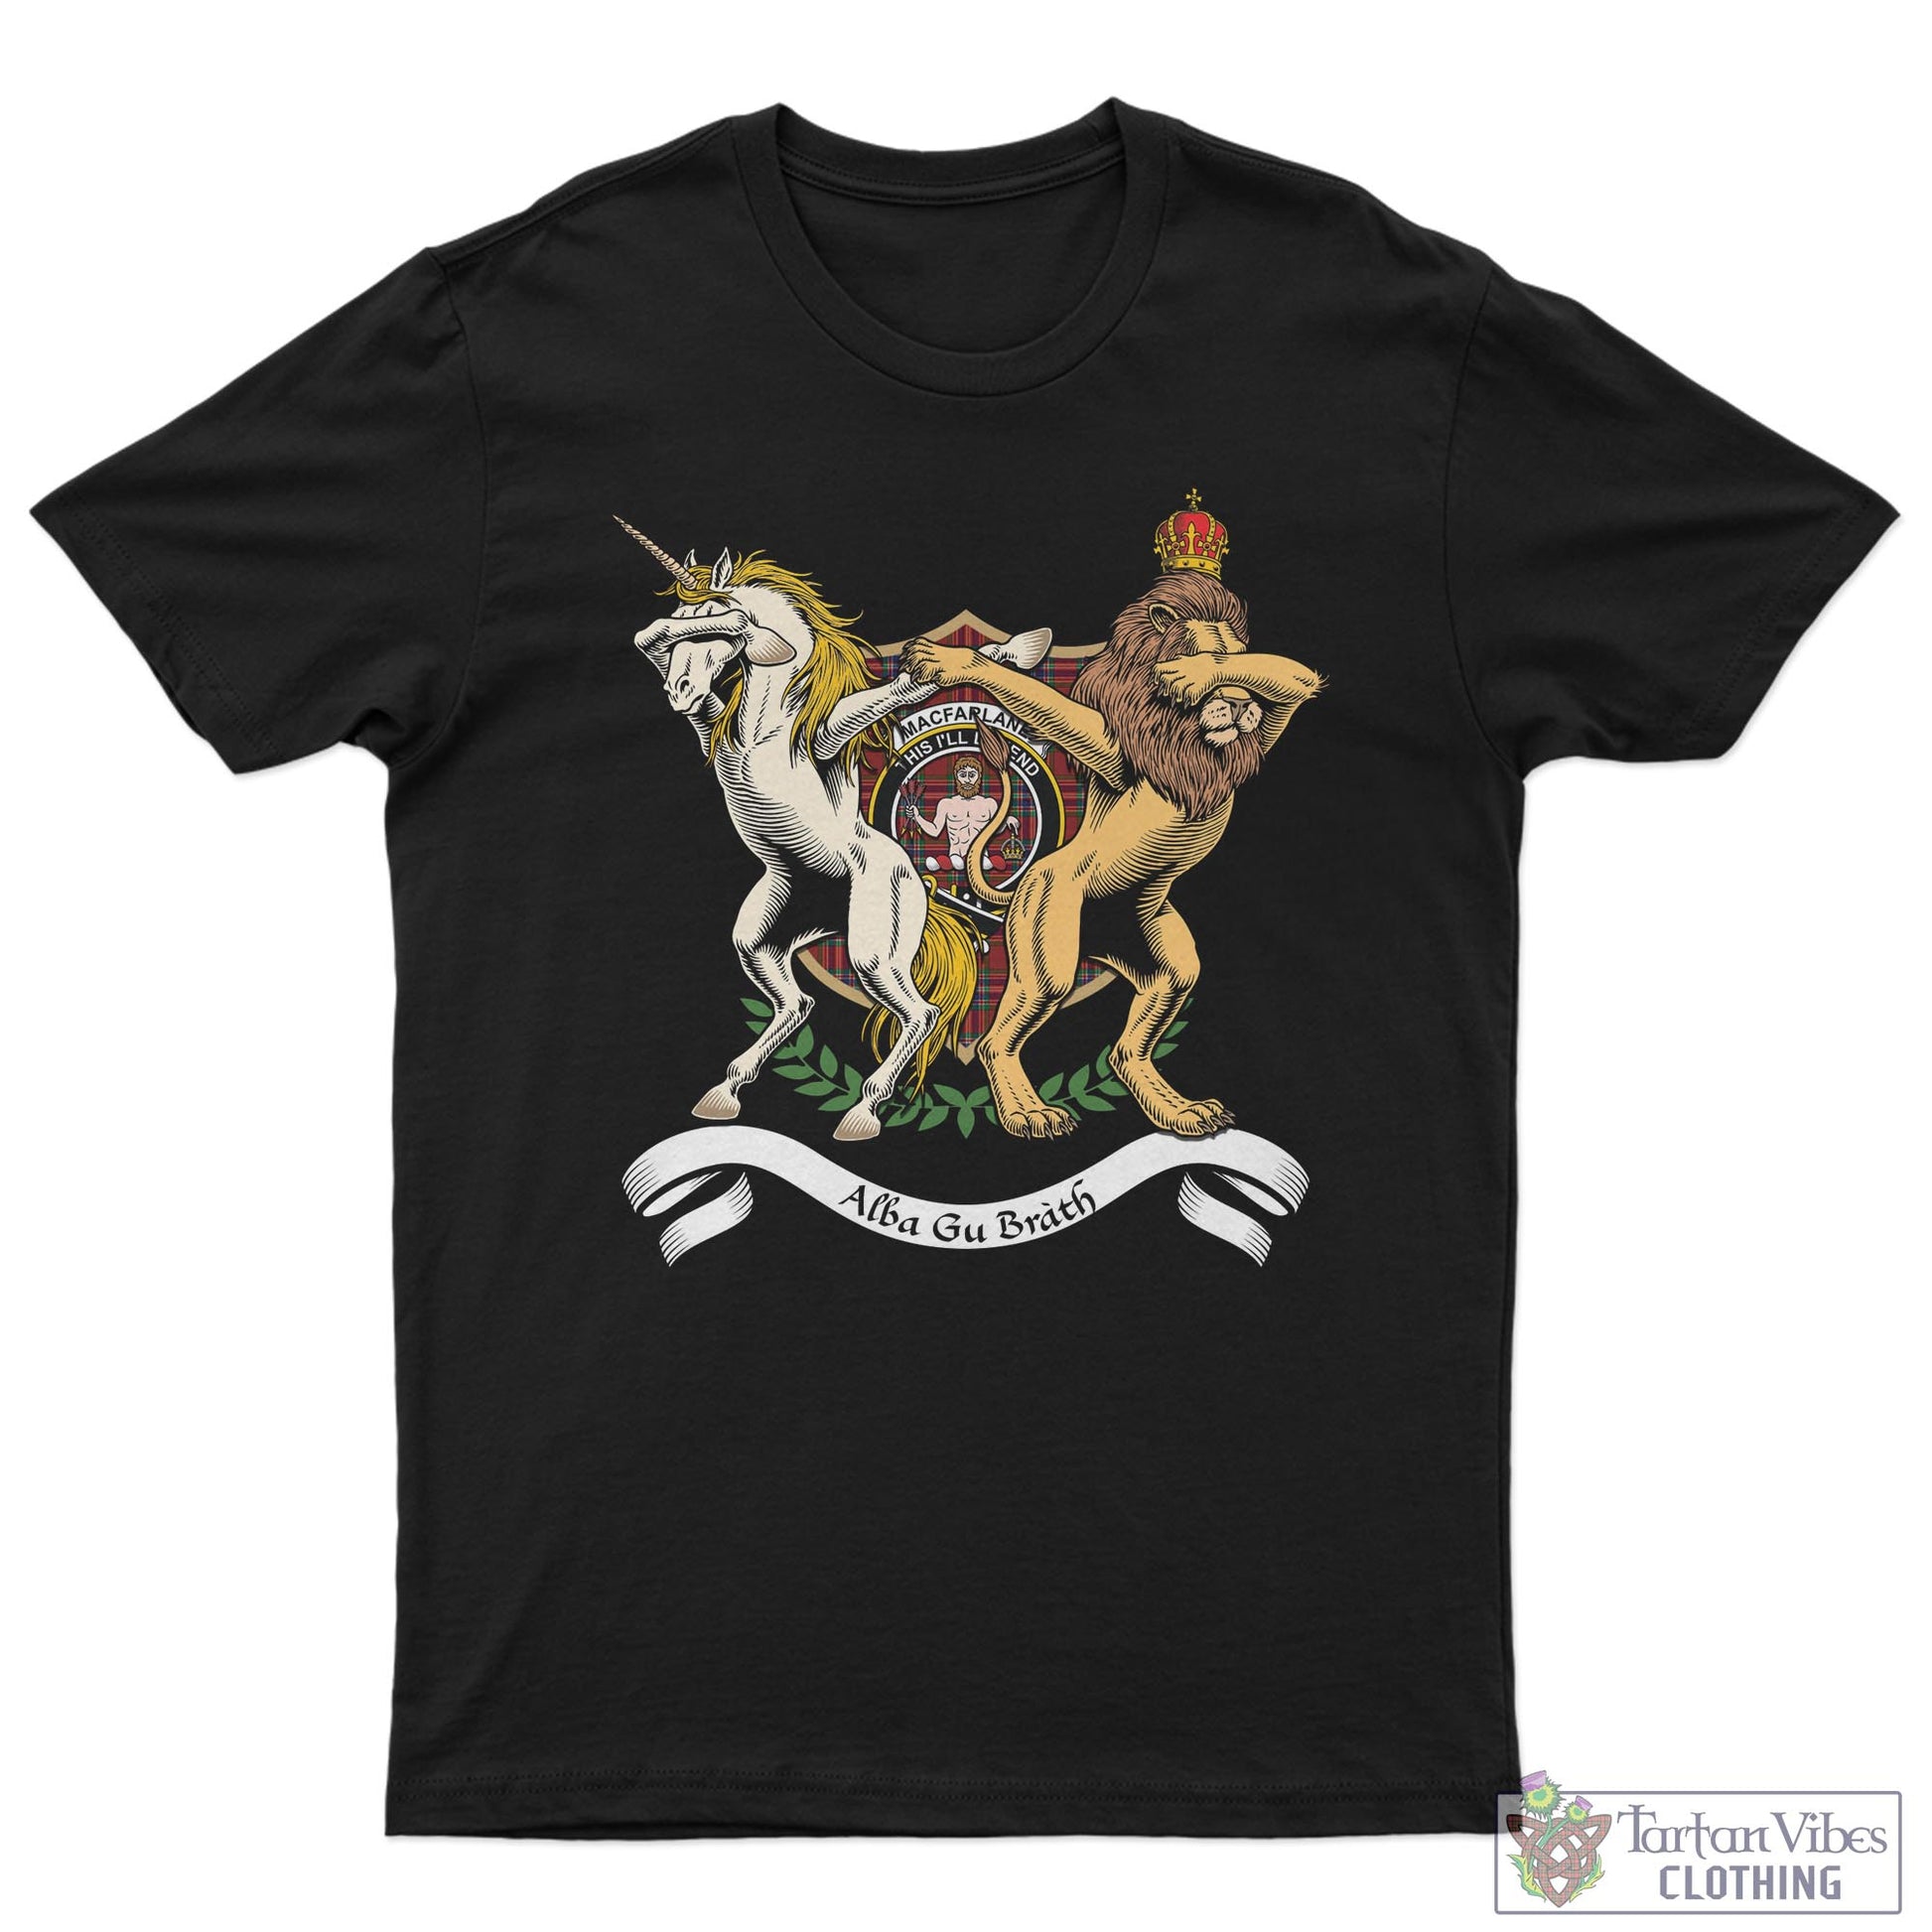 Tartan Vibes Clothing MacFarlane Red Family Crest Cotton Men's T-Shirt with Scotland Royal Coat Of Arm Funny Style